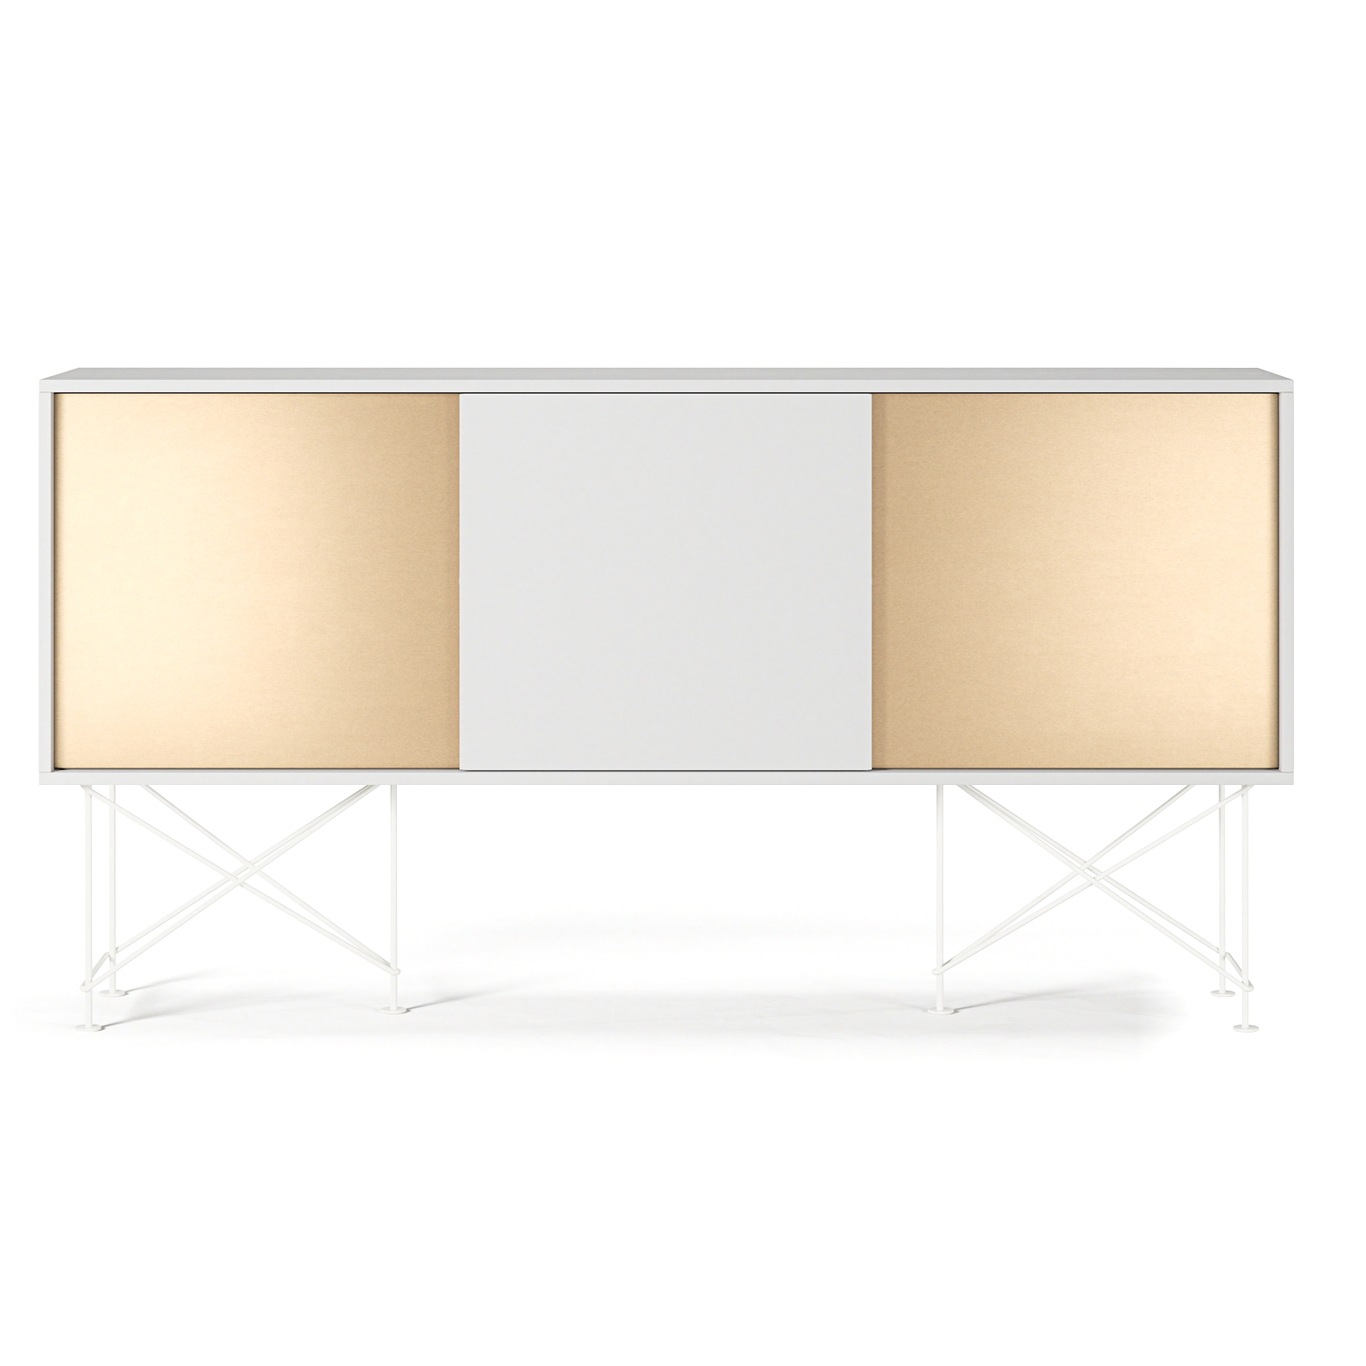 Vogue Sideboard 2 Brass Doors With Stand 180 cm, White / Brass / White